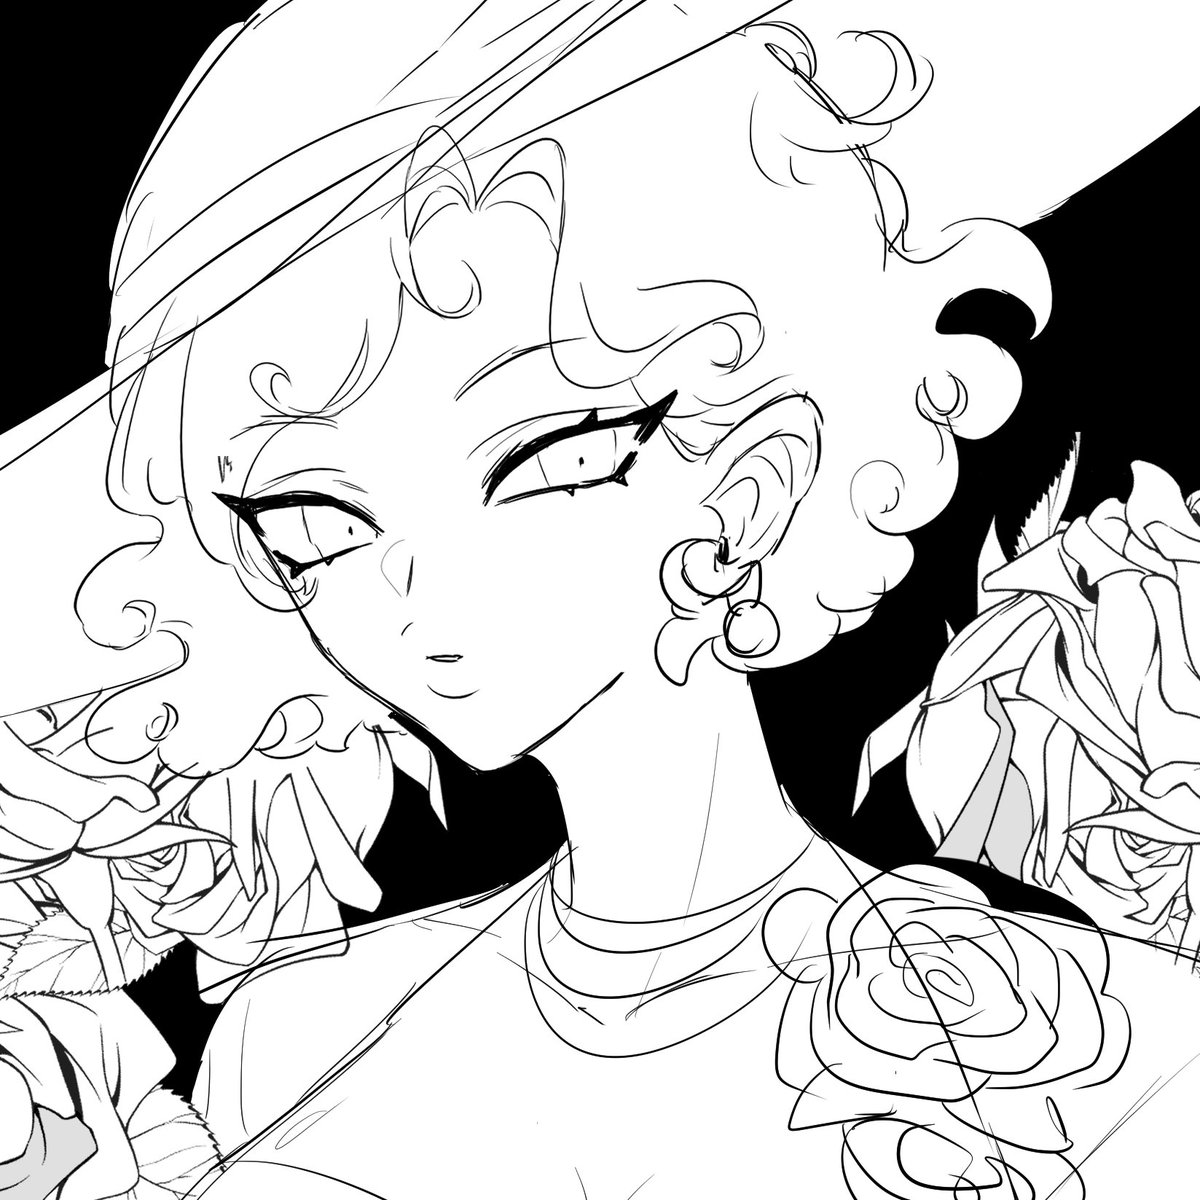 WIP of.... a very specific birthday gift for a friend 